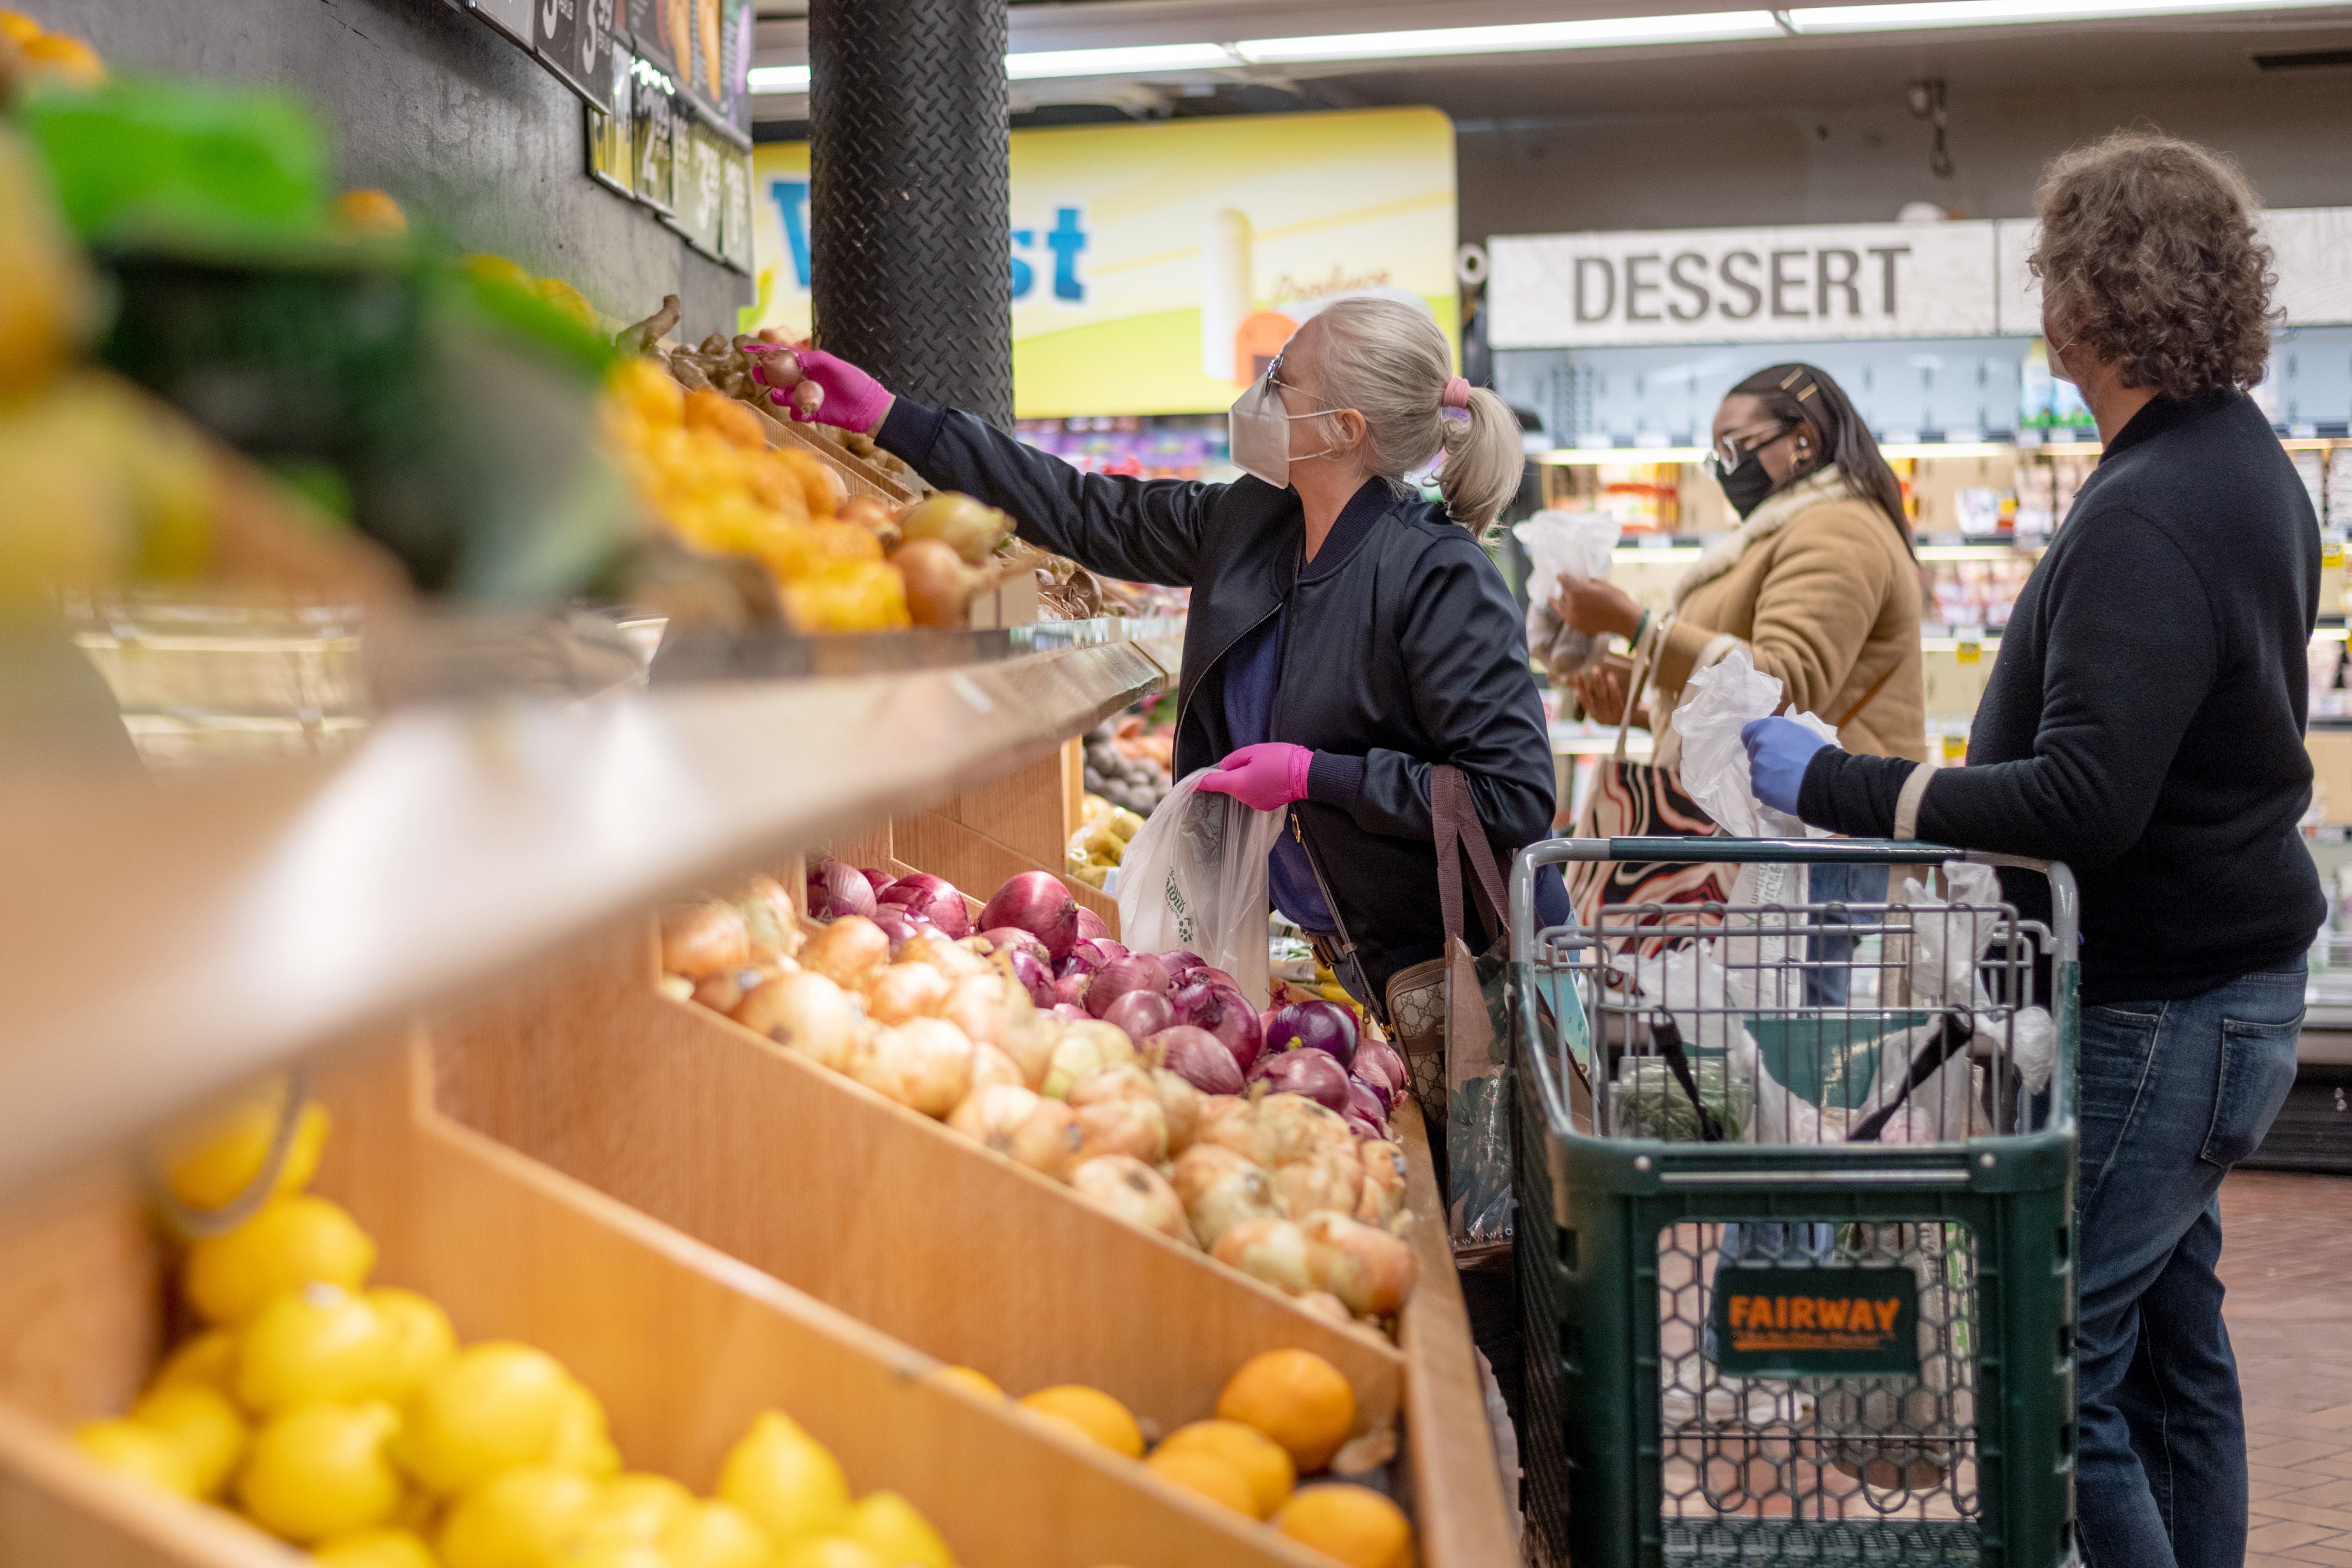 Google Says This Is When You Should Go Grocery Shopping To Avoid Crowds